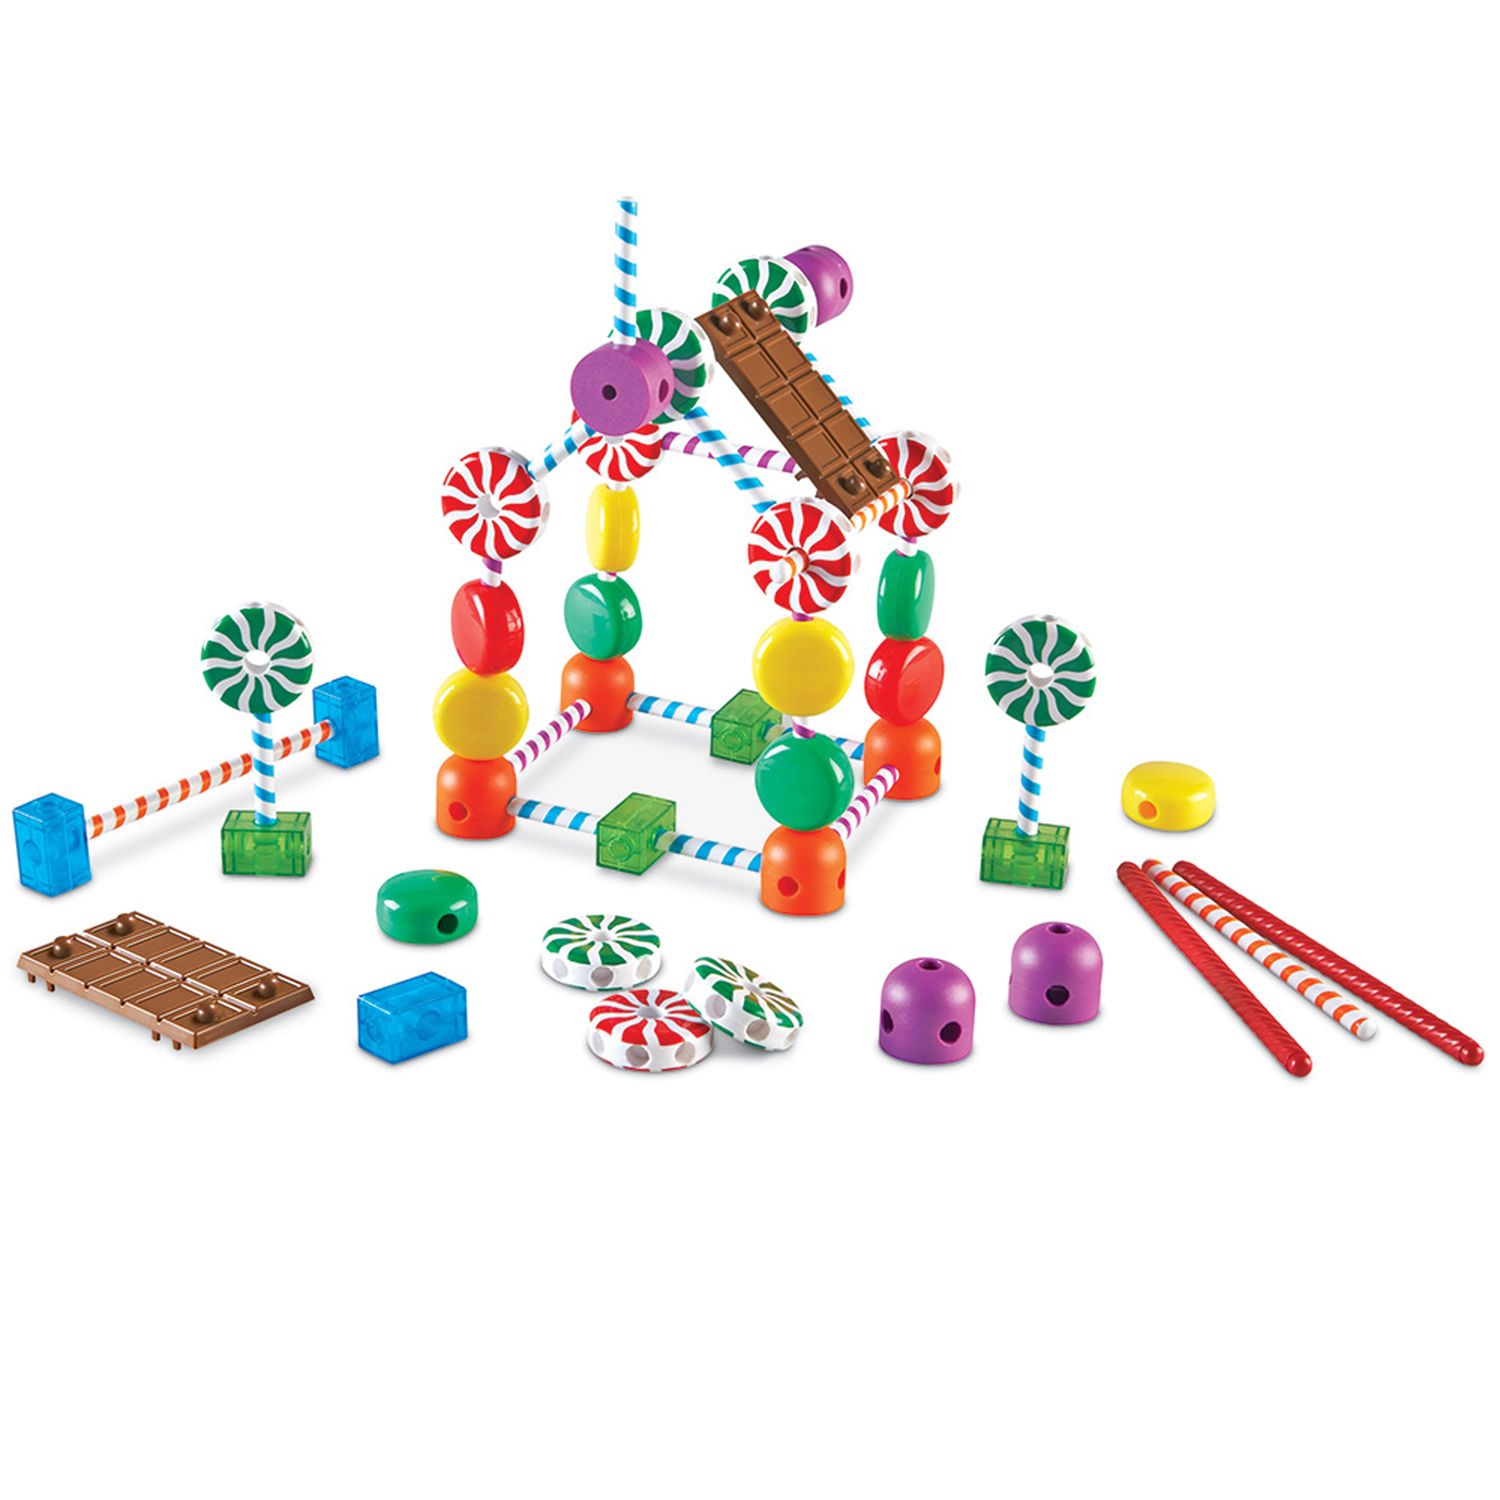 Image for Learning Resources Candy Construction Building Set by at Kohl's.